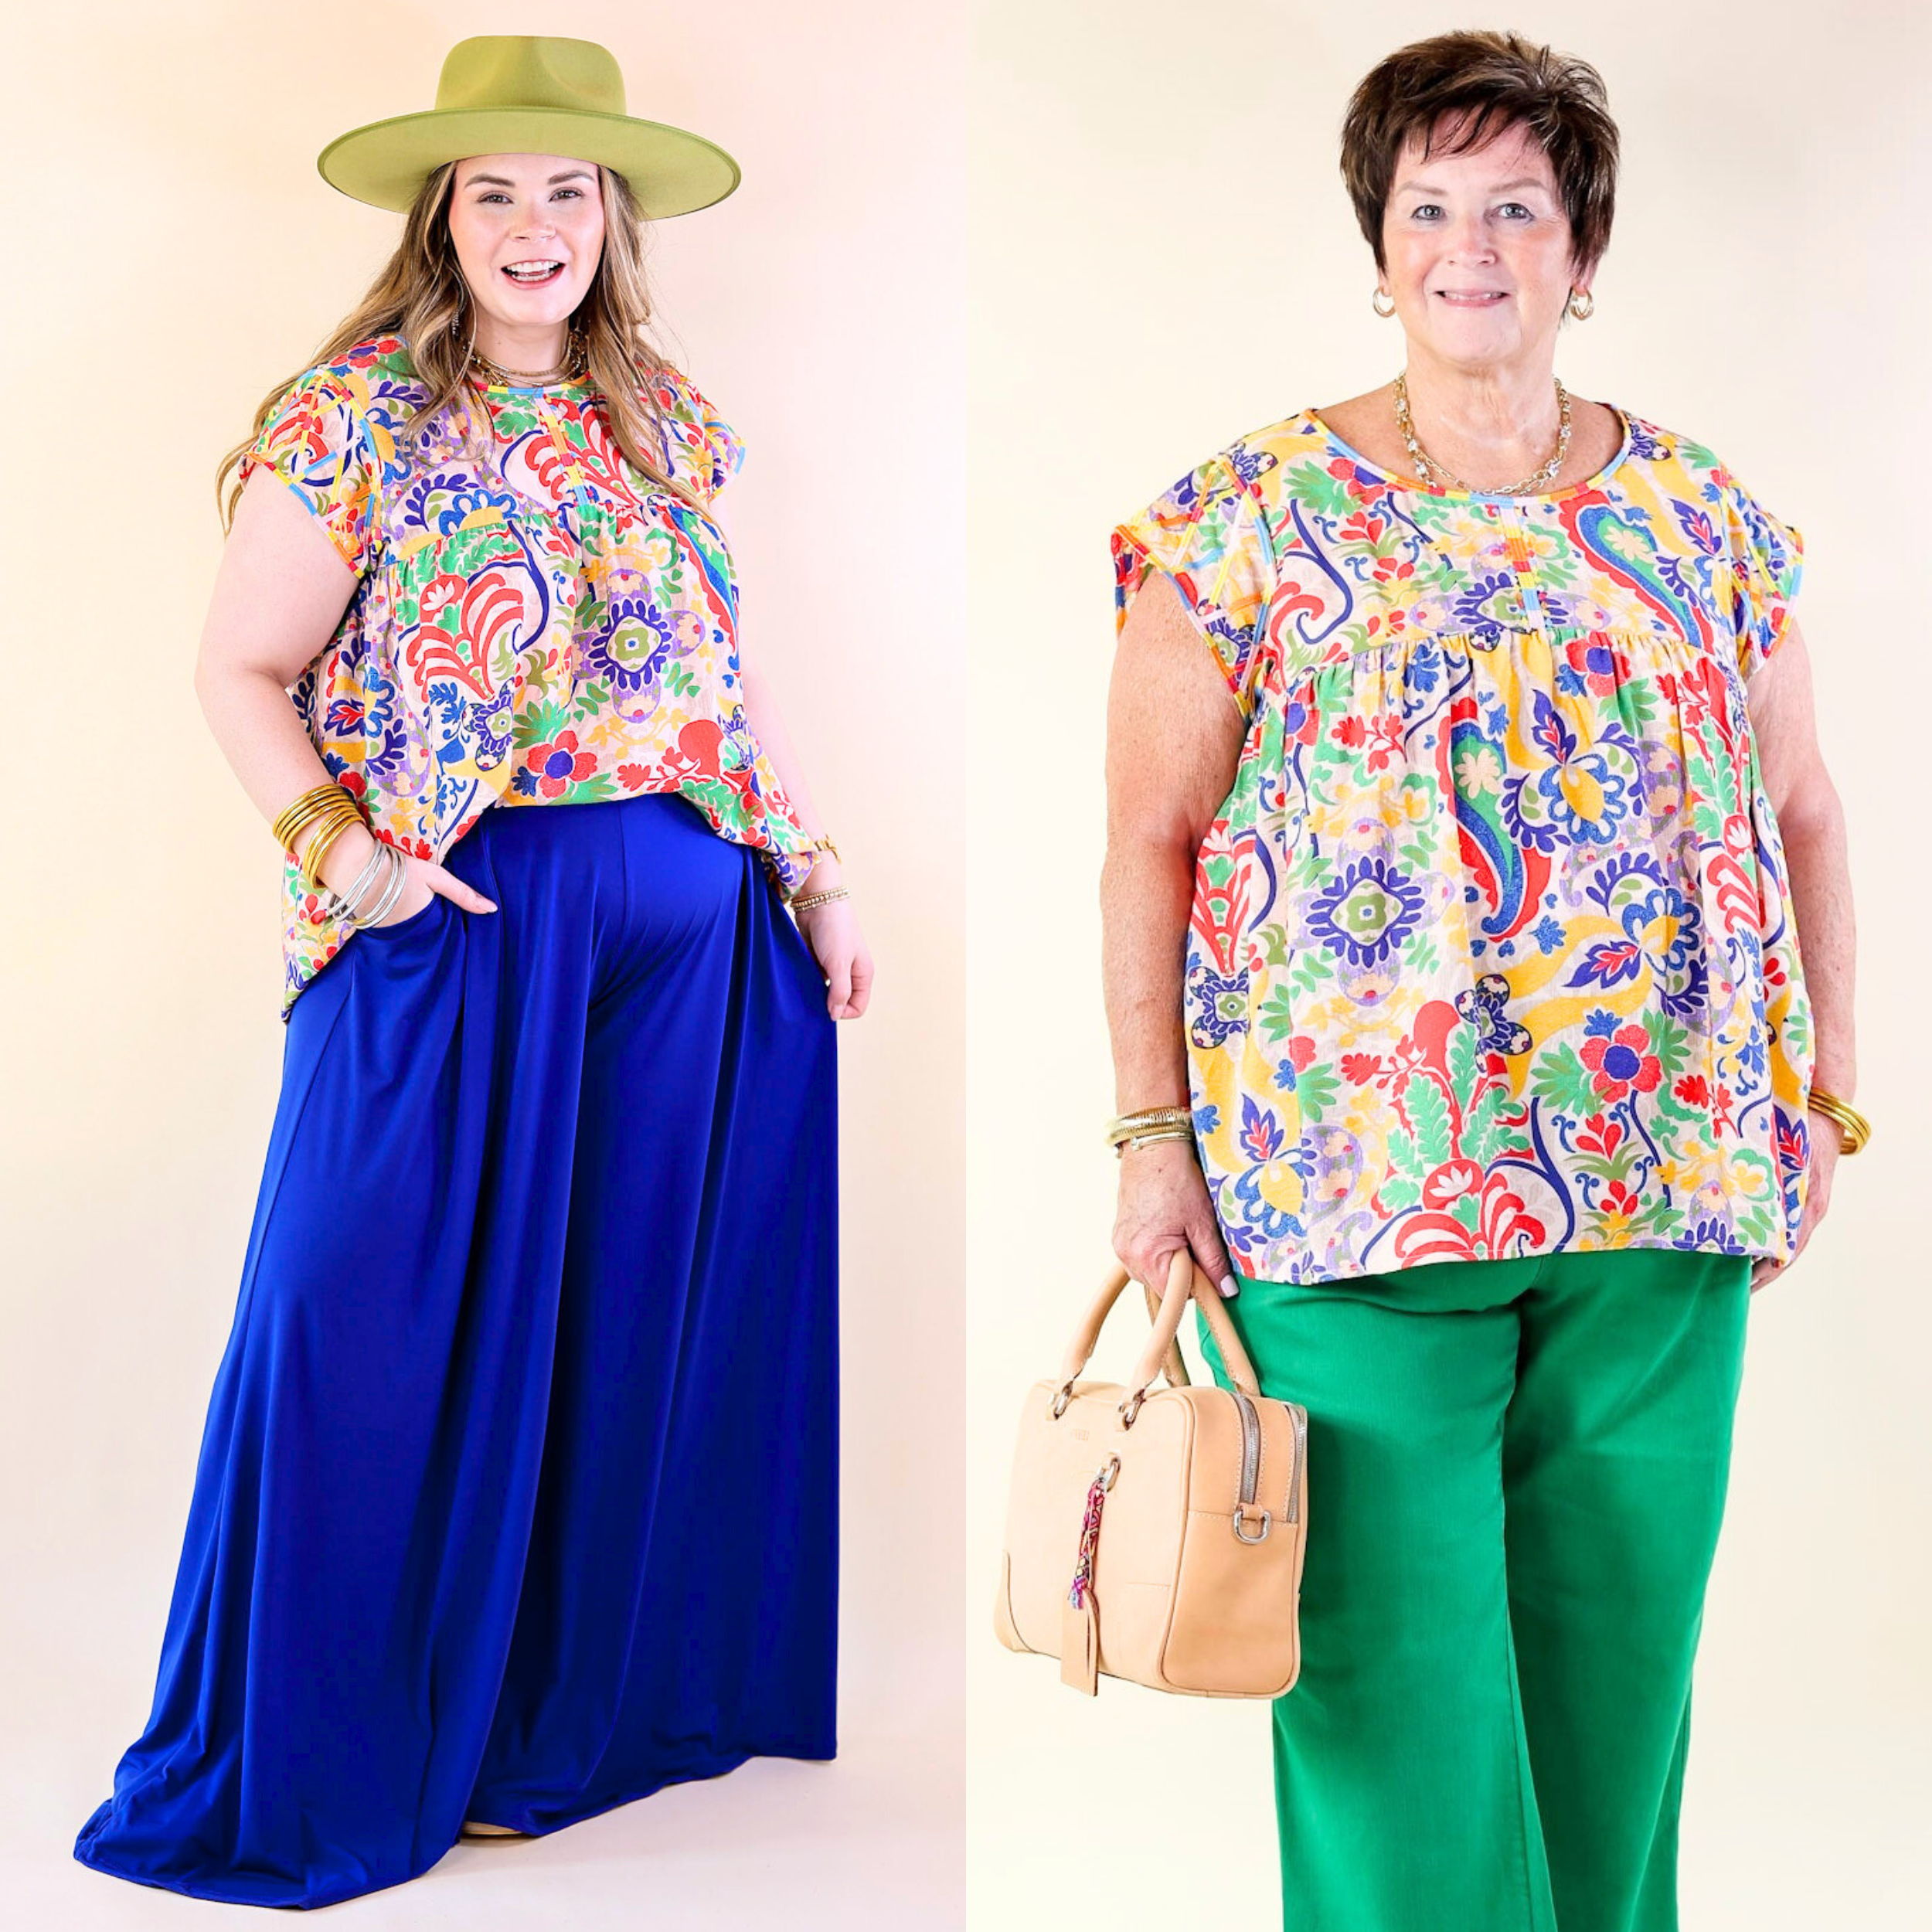 Vibrant Vista Multi-Color Paisley and Floral Print Top with Embroidery - Giddy Up Glamour Boutique